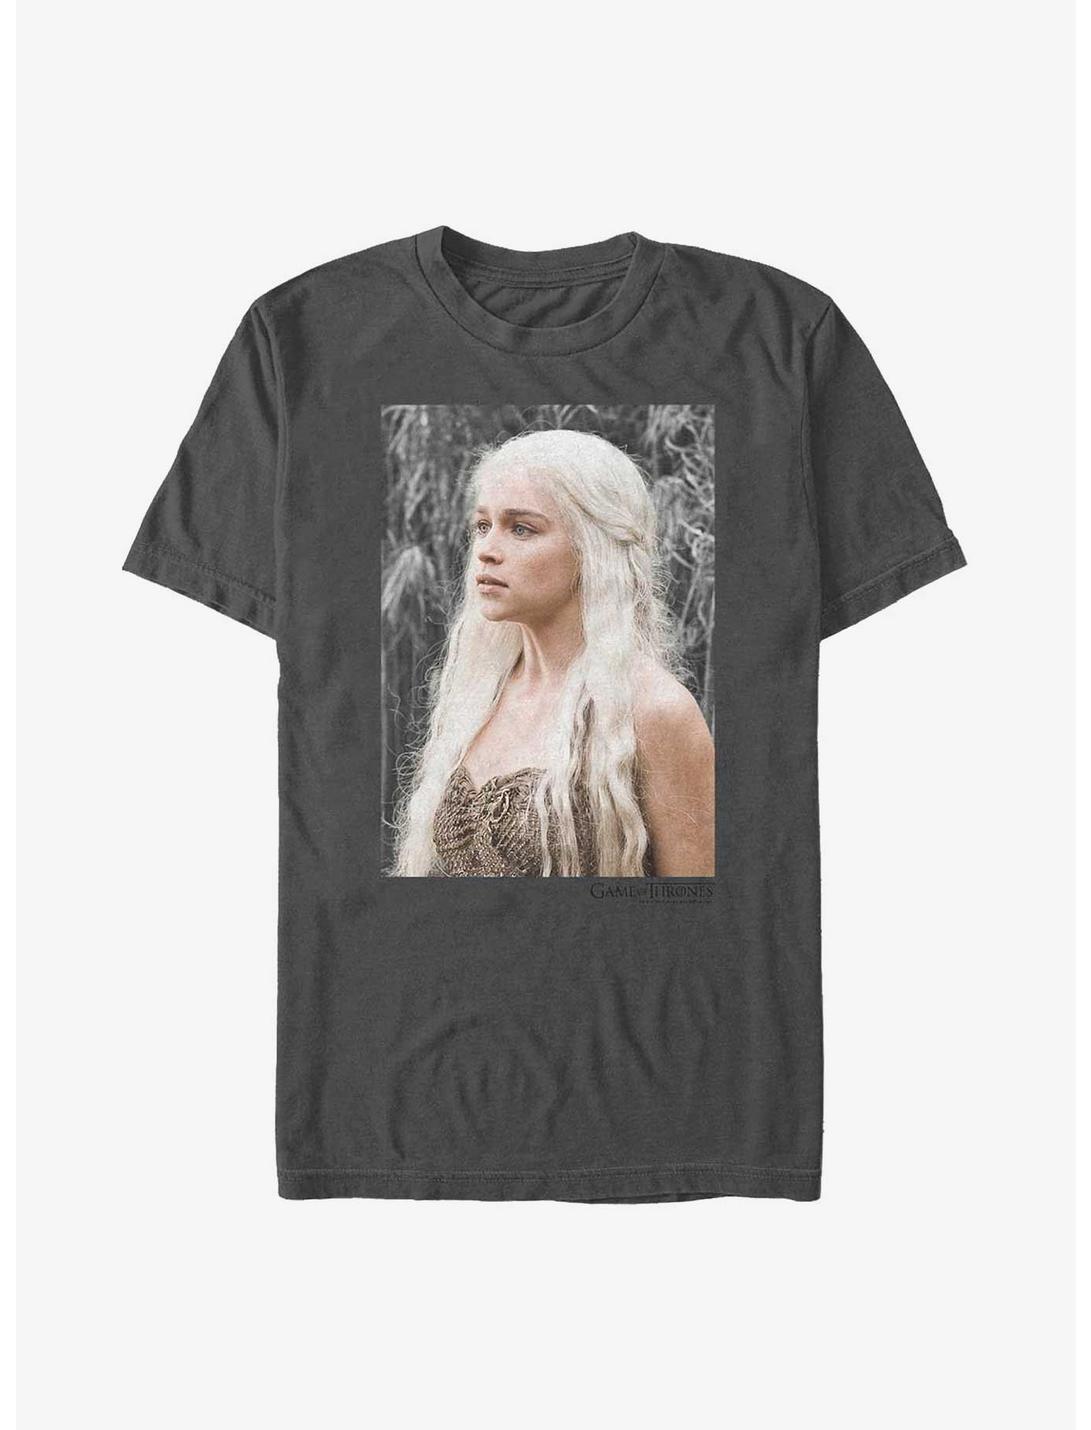 Game Of Thrones Daenerys Portrait T-Shirt, CHARCOAL, hi-res